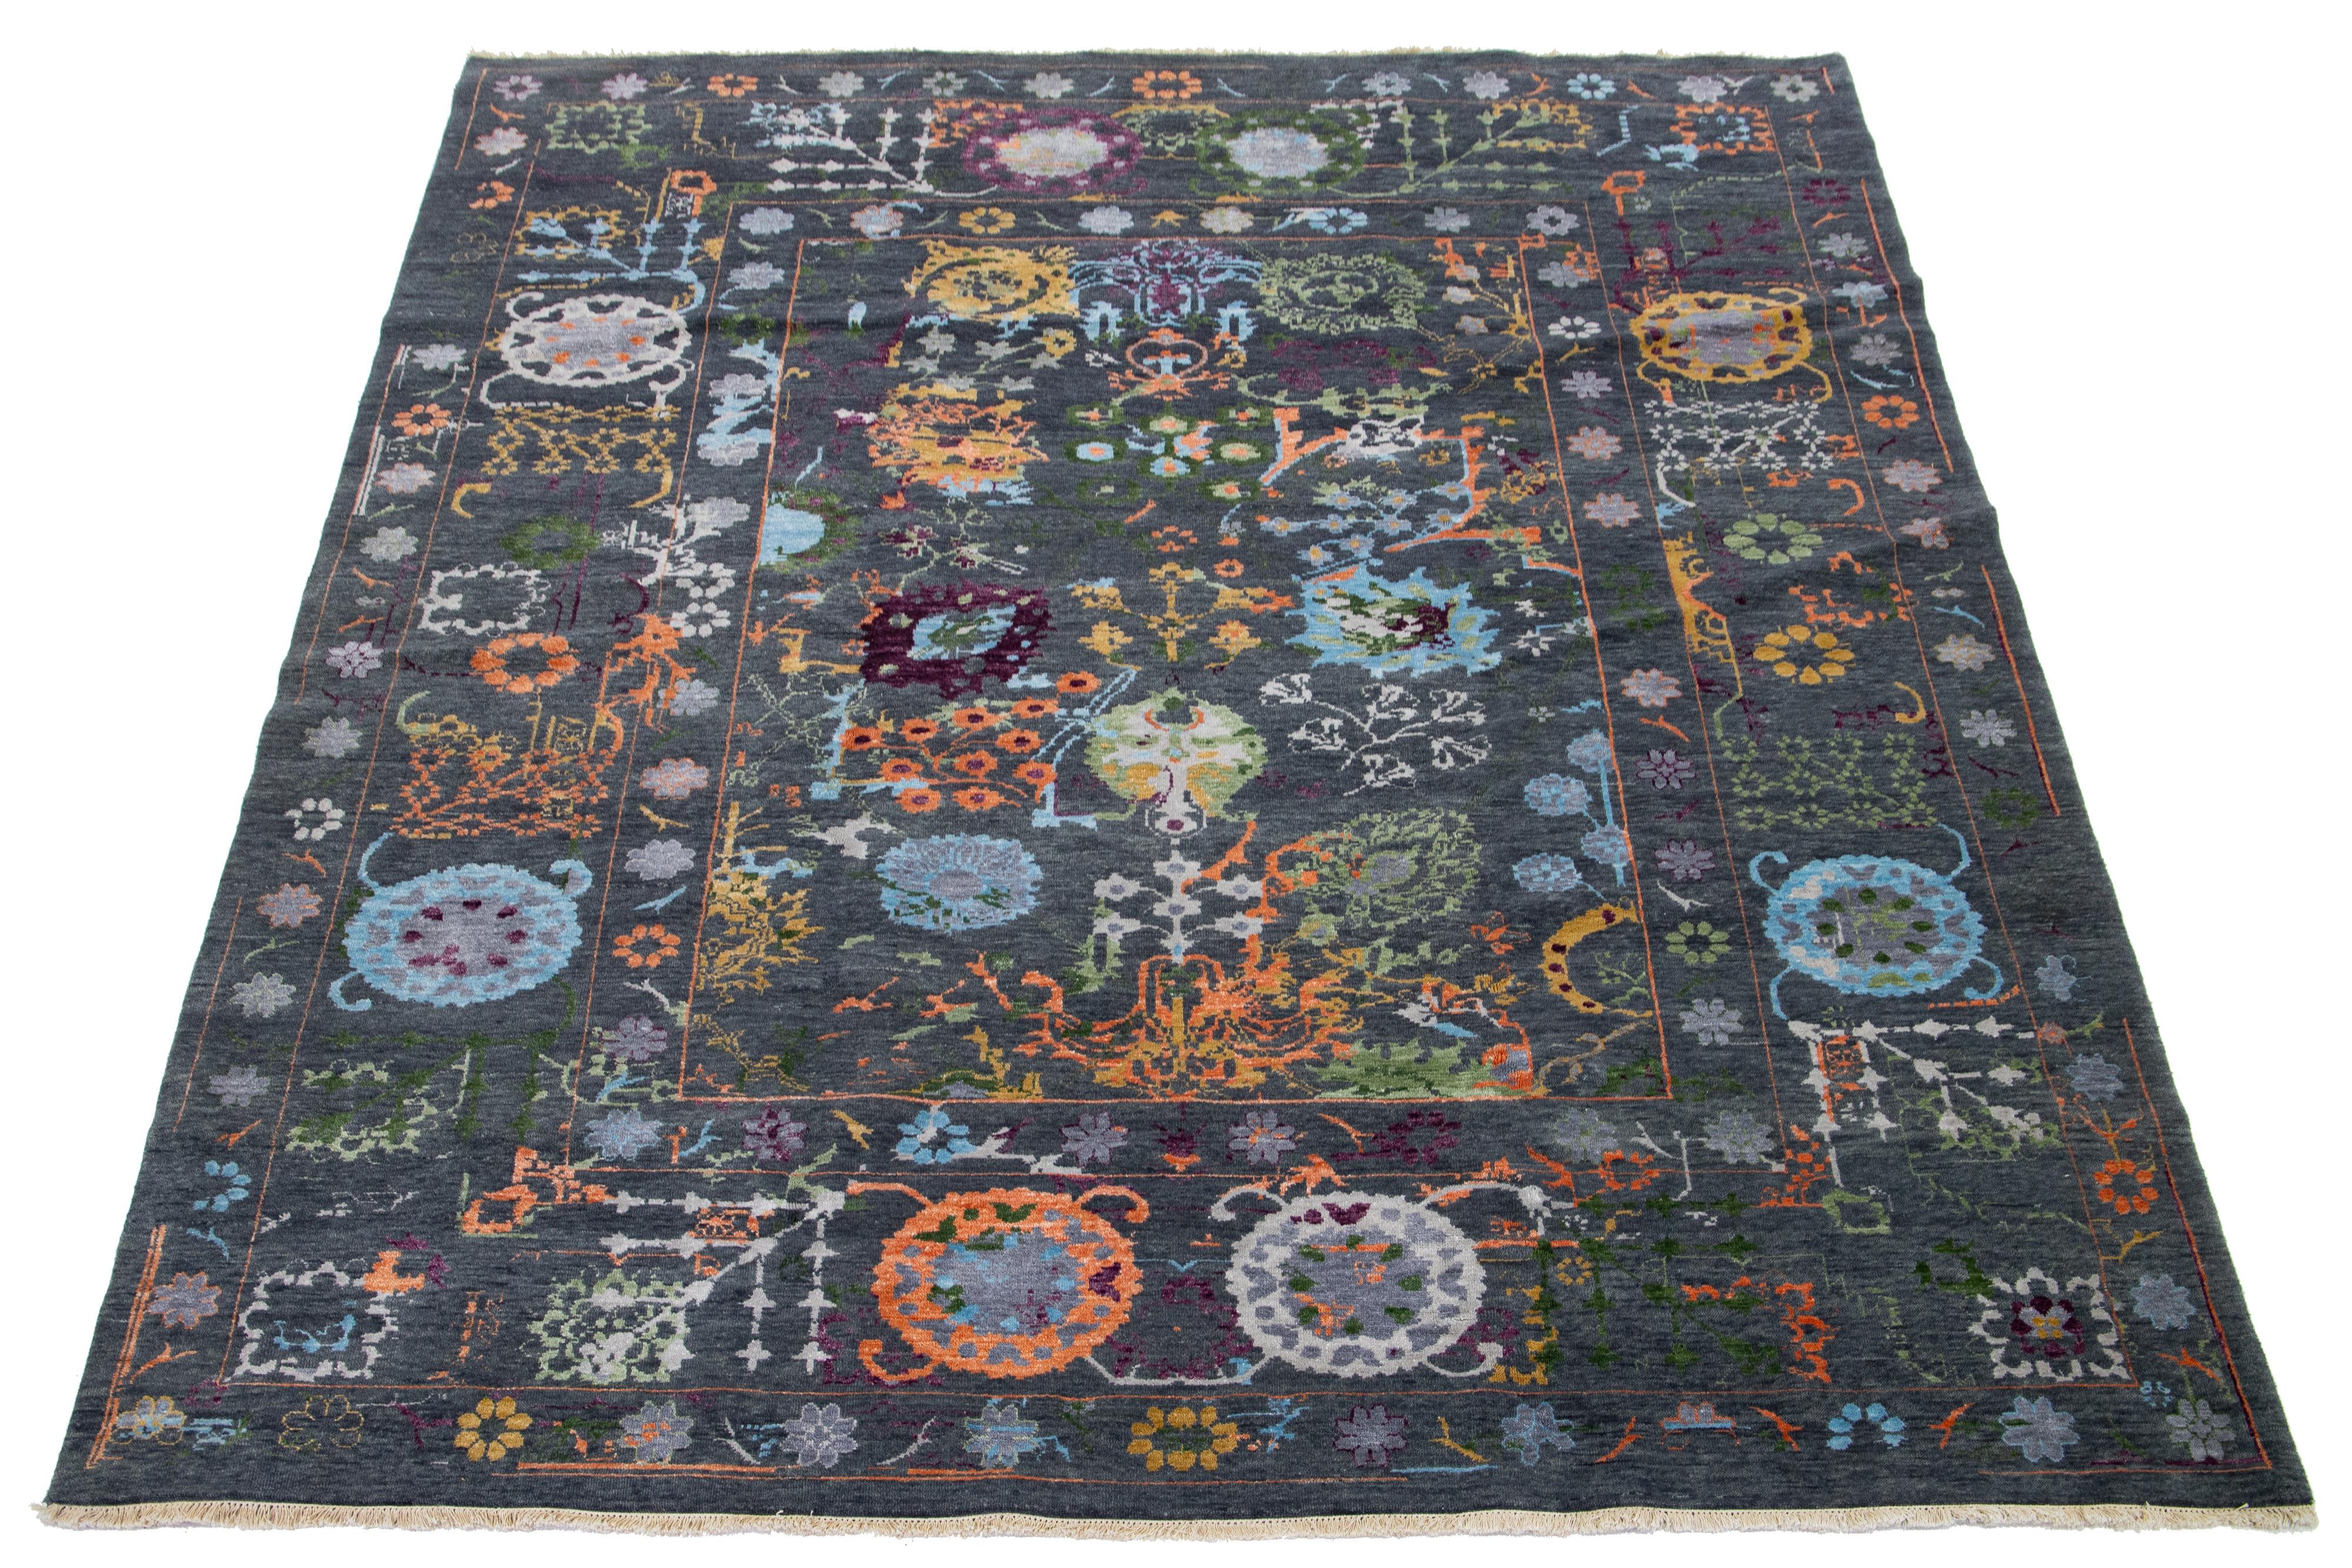 Stunning in its contemporary style, this wool rug showcases a mesmerizing floral design in a captivating shade of gray-charcoal. Its allure is heightened by the exquisitely multicolor accents that effortlessly harmonize with the distinctive floral